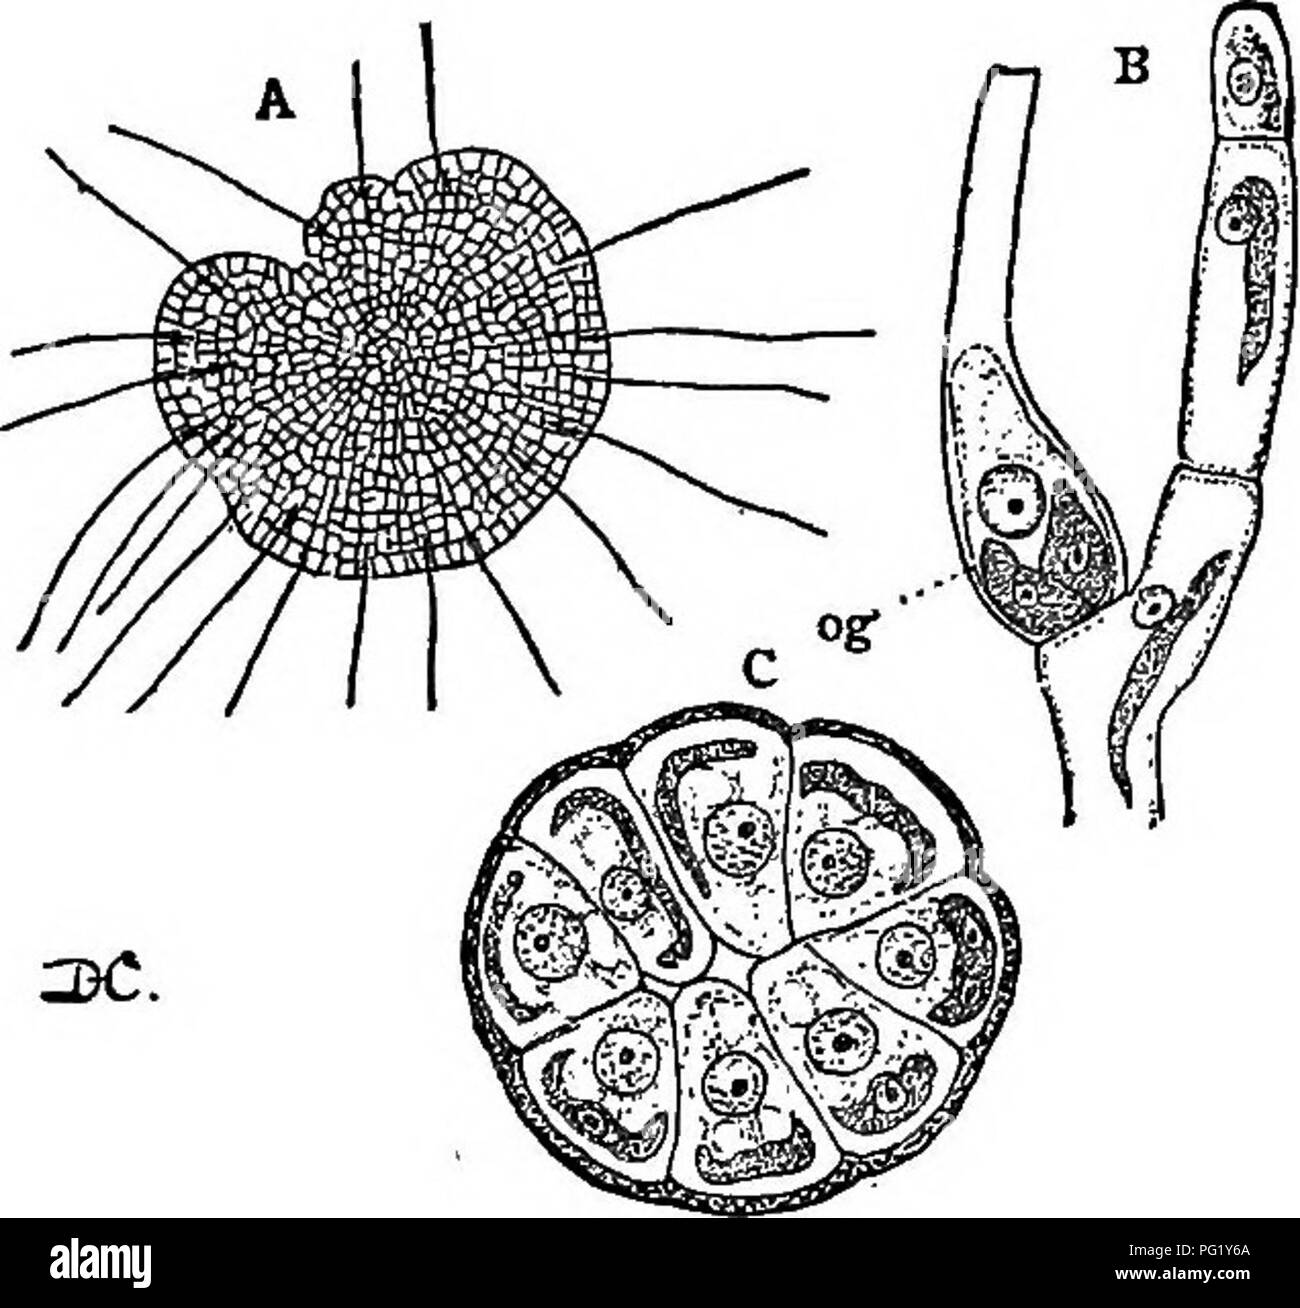 . Lectures on the evolution of plants. Botany; Plants. 54 EVOLUTION OP PLANTS 9, C, an), and closely resemble the zoospores except in size, and the partial or complete loss of chlorophyll. The spermatozoid has a large nucleus with relatively little cytoplasm, as the nucleus is probably of the most impor- tance in the act of fecundation. At maturity the oogonium opens and permits the en- trance of the motile spermatozoid, which at once pene- trates into the egg-cell where its nucleus fuses with that of the egg, thus fertilizing it. As the result of fertilization the egg becomes in- vested with  Stock Photo